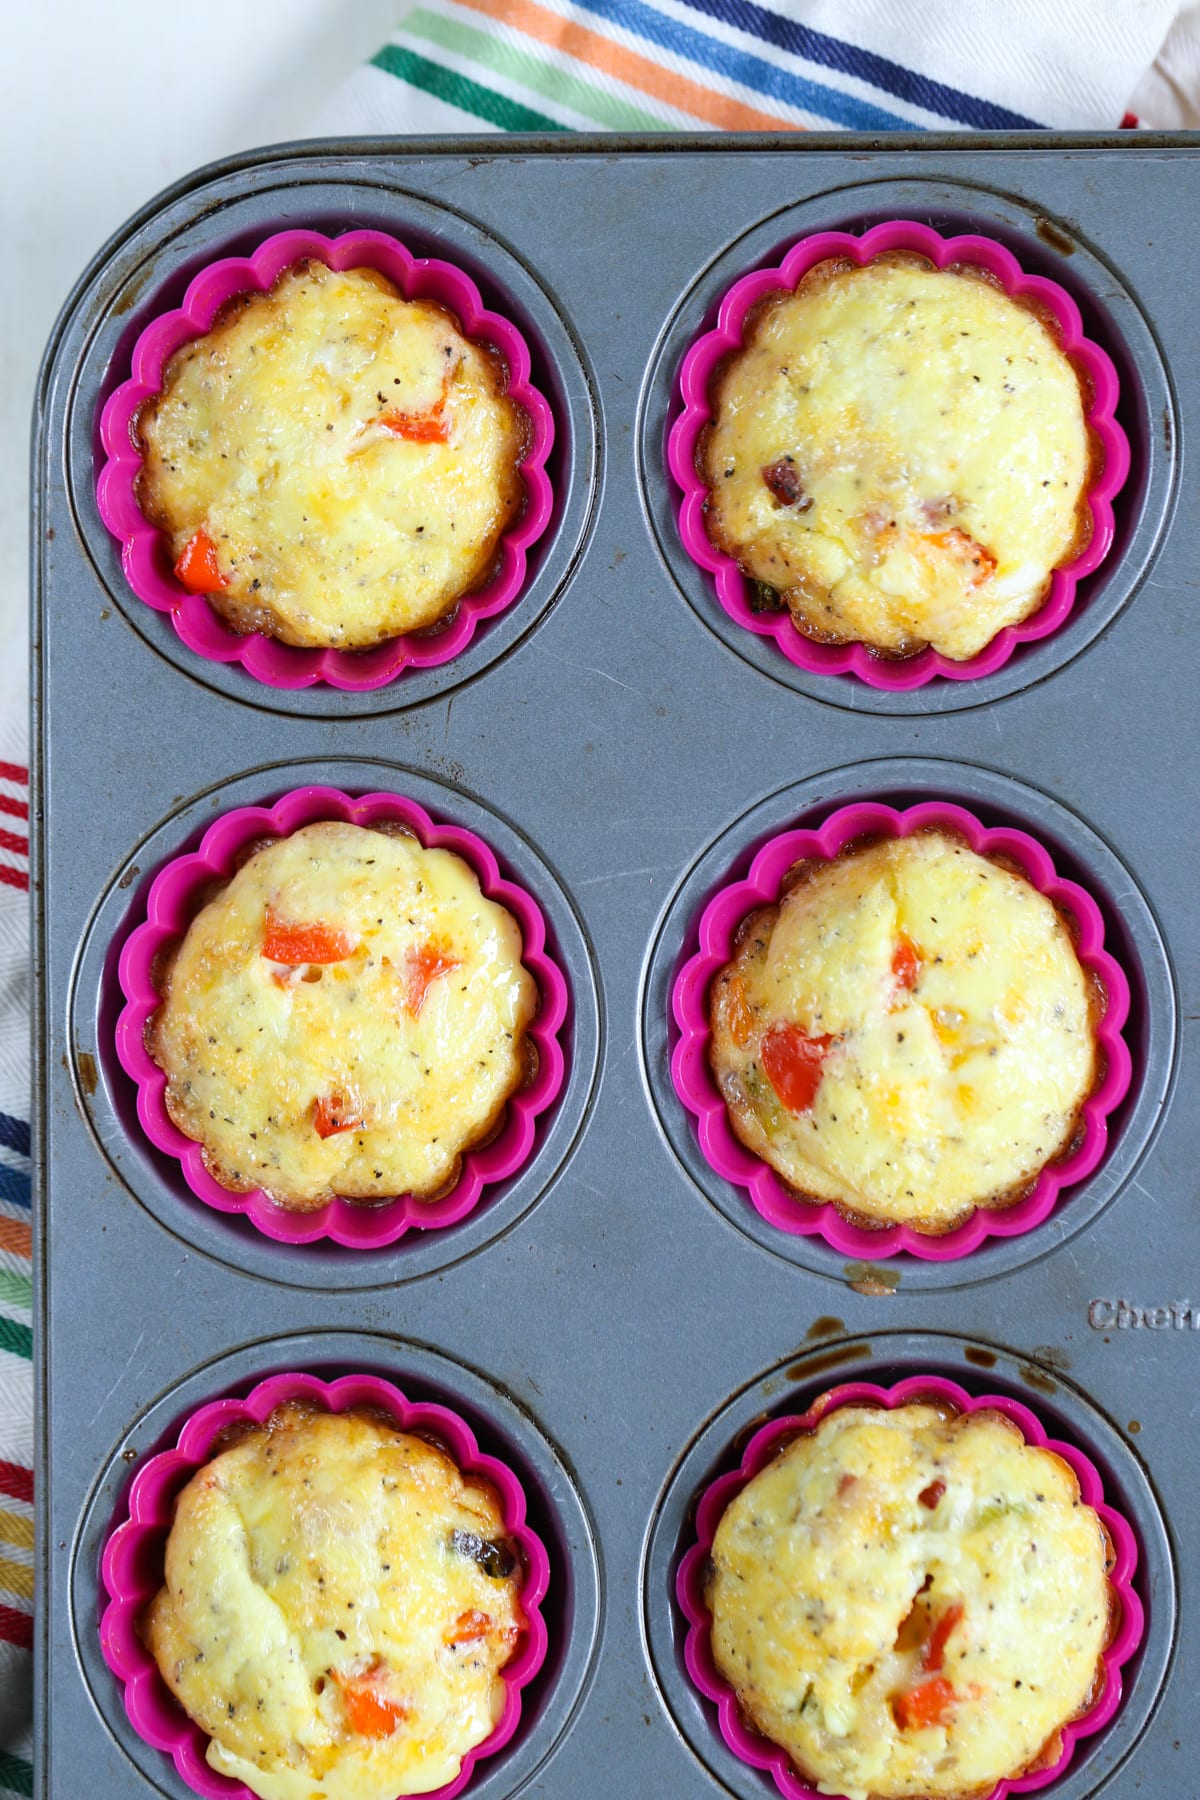 Omelet cups are the ultimate make-ahead busy morning meal or lunch. They will last well for 2 months in the freezer and in the fridge for 3-4 days. Just reheat the egg cups and serve. Easy peasy, healthy, and scrumptious!